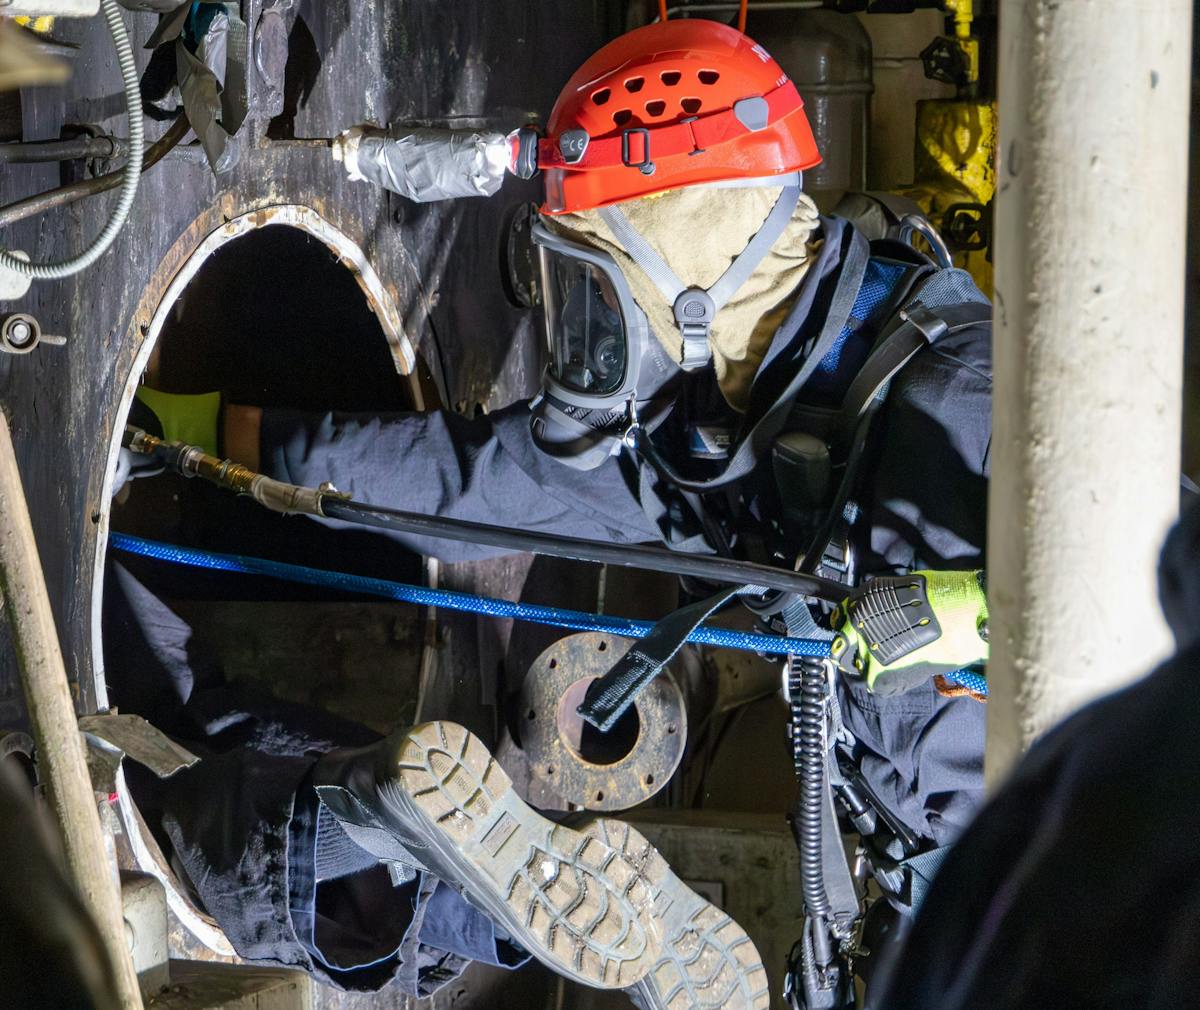 Firefighters & The First 15 Minutes of a Confined-Space Rescue